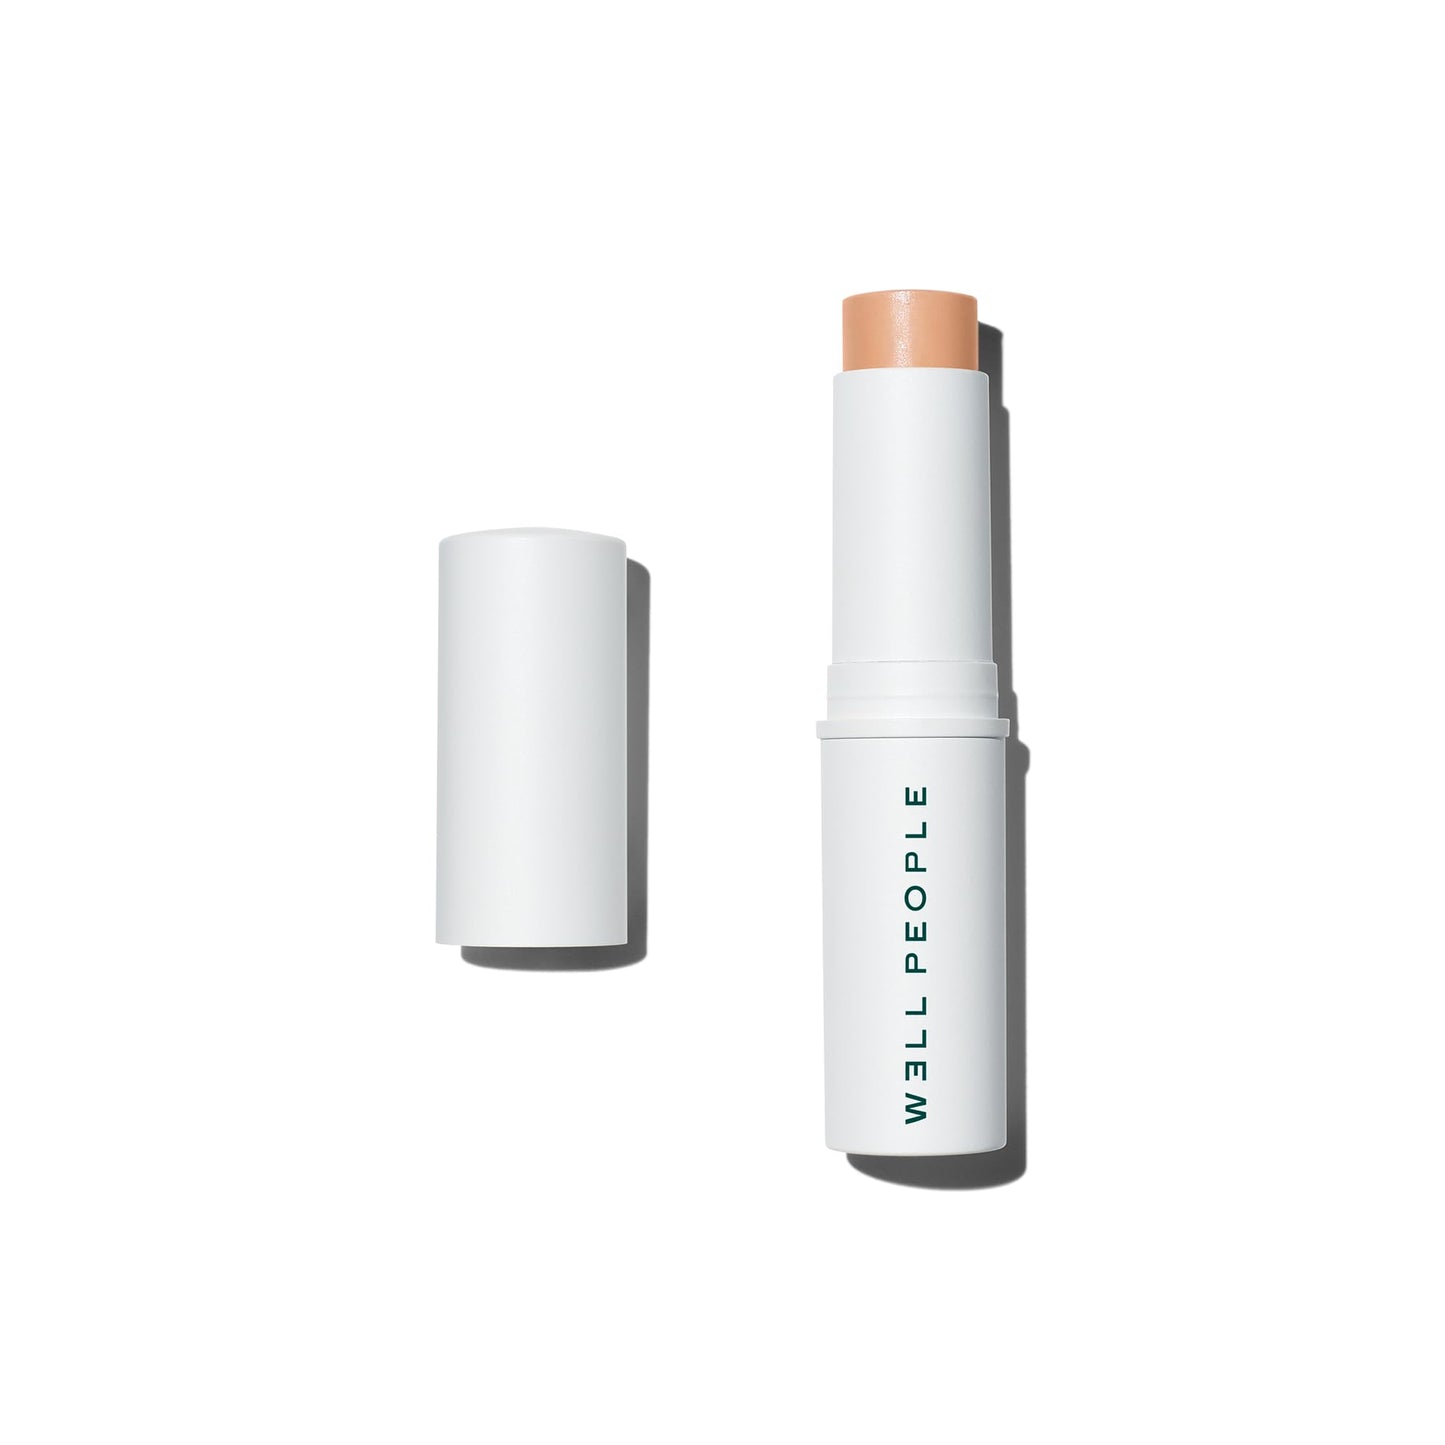 Well People Bio Stick Foundation, Creamy, Multi-use, Hydrating Foundation For Glowing Skin, Creates A Natural, Satin Finish, Vegan & Cruelty-free, 1C